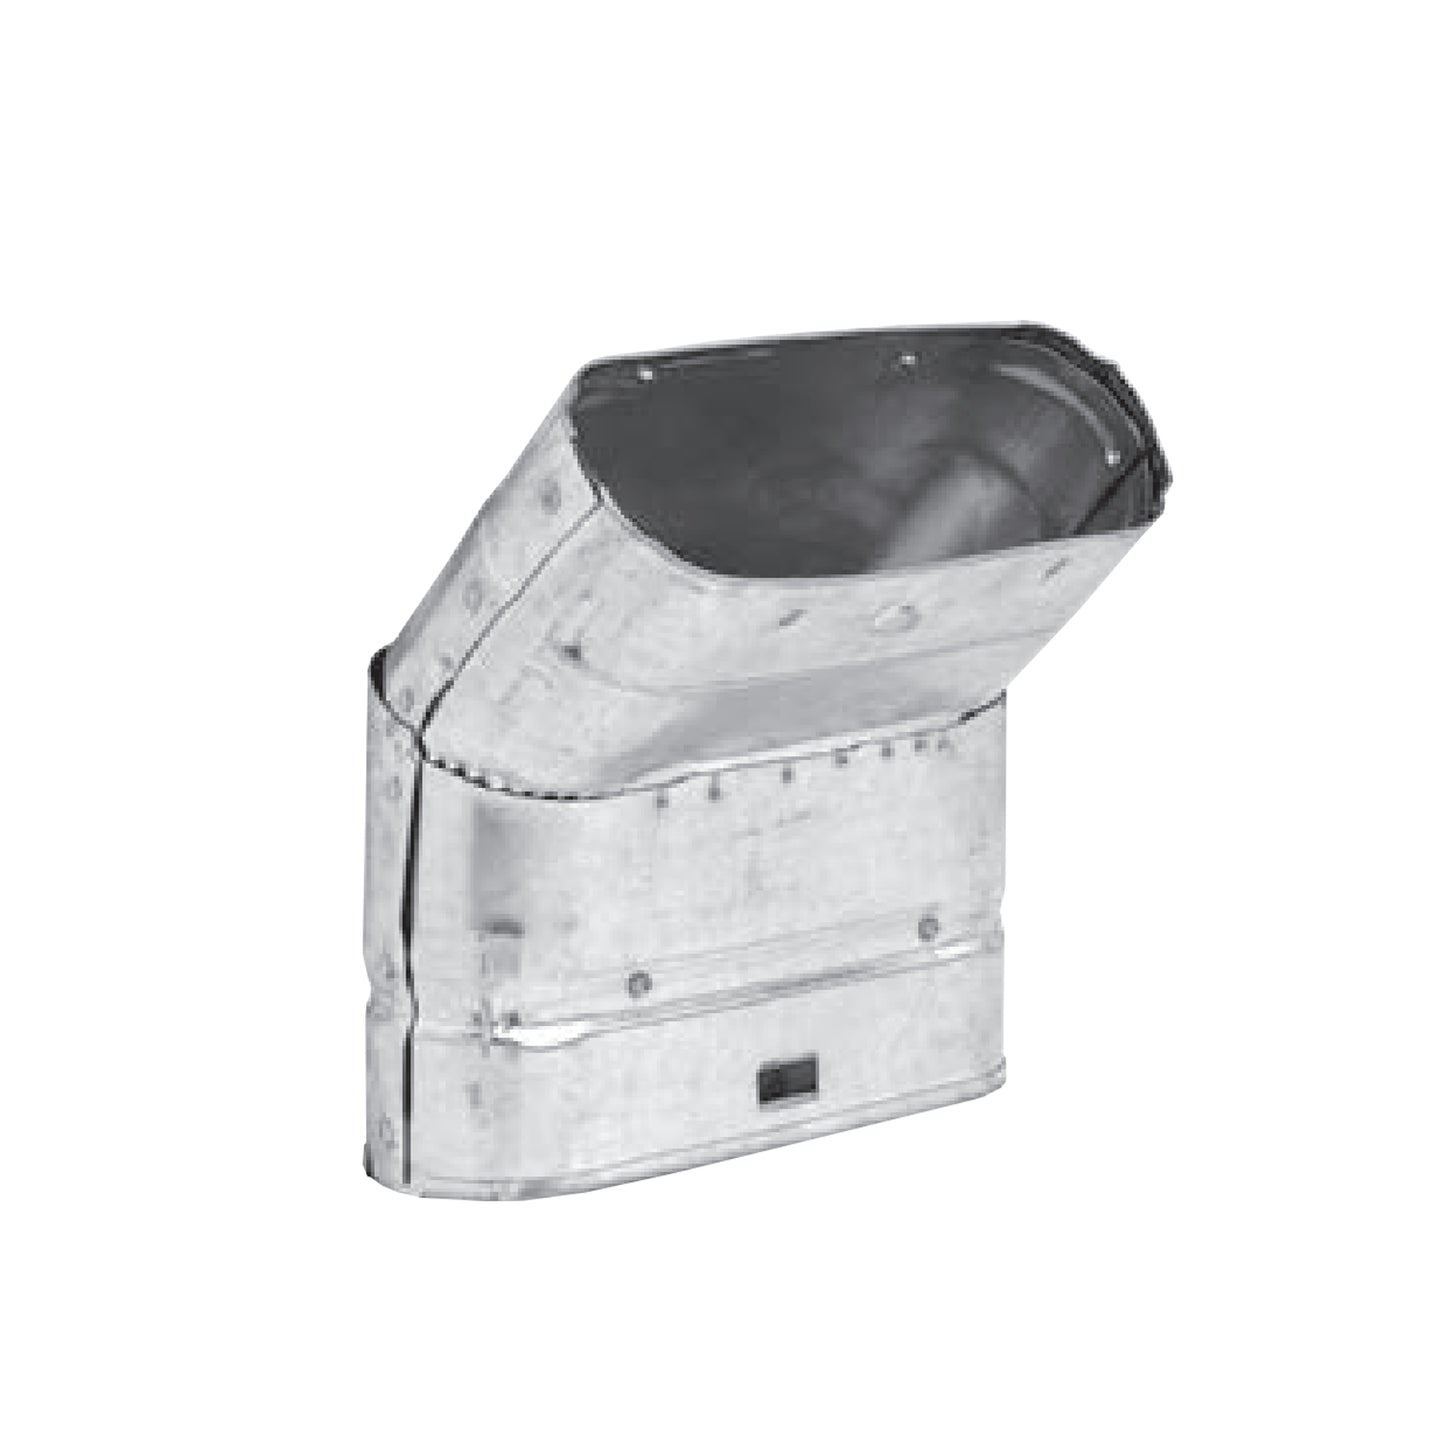 4MO45S - Type-B Gas Vent Oval 45 Degree Fixed Angle - 4"